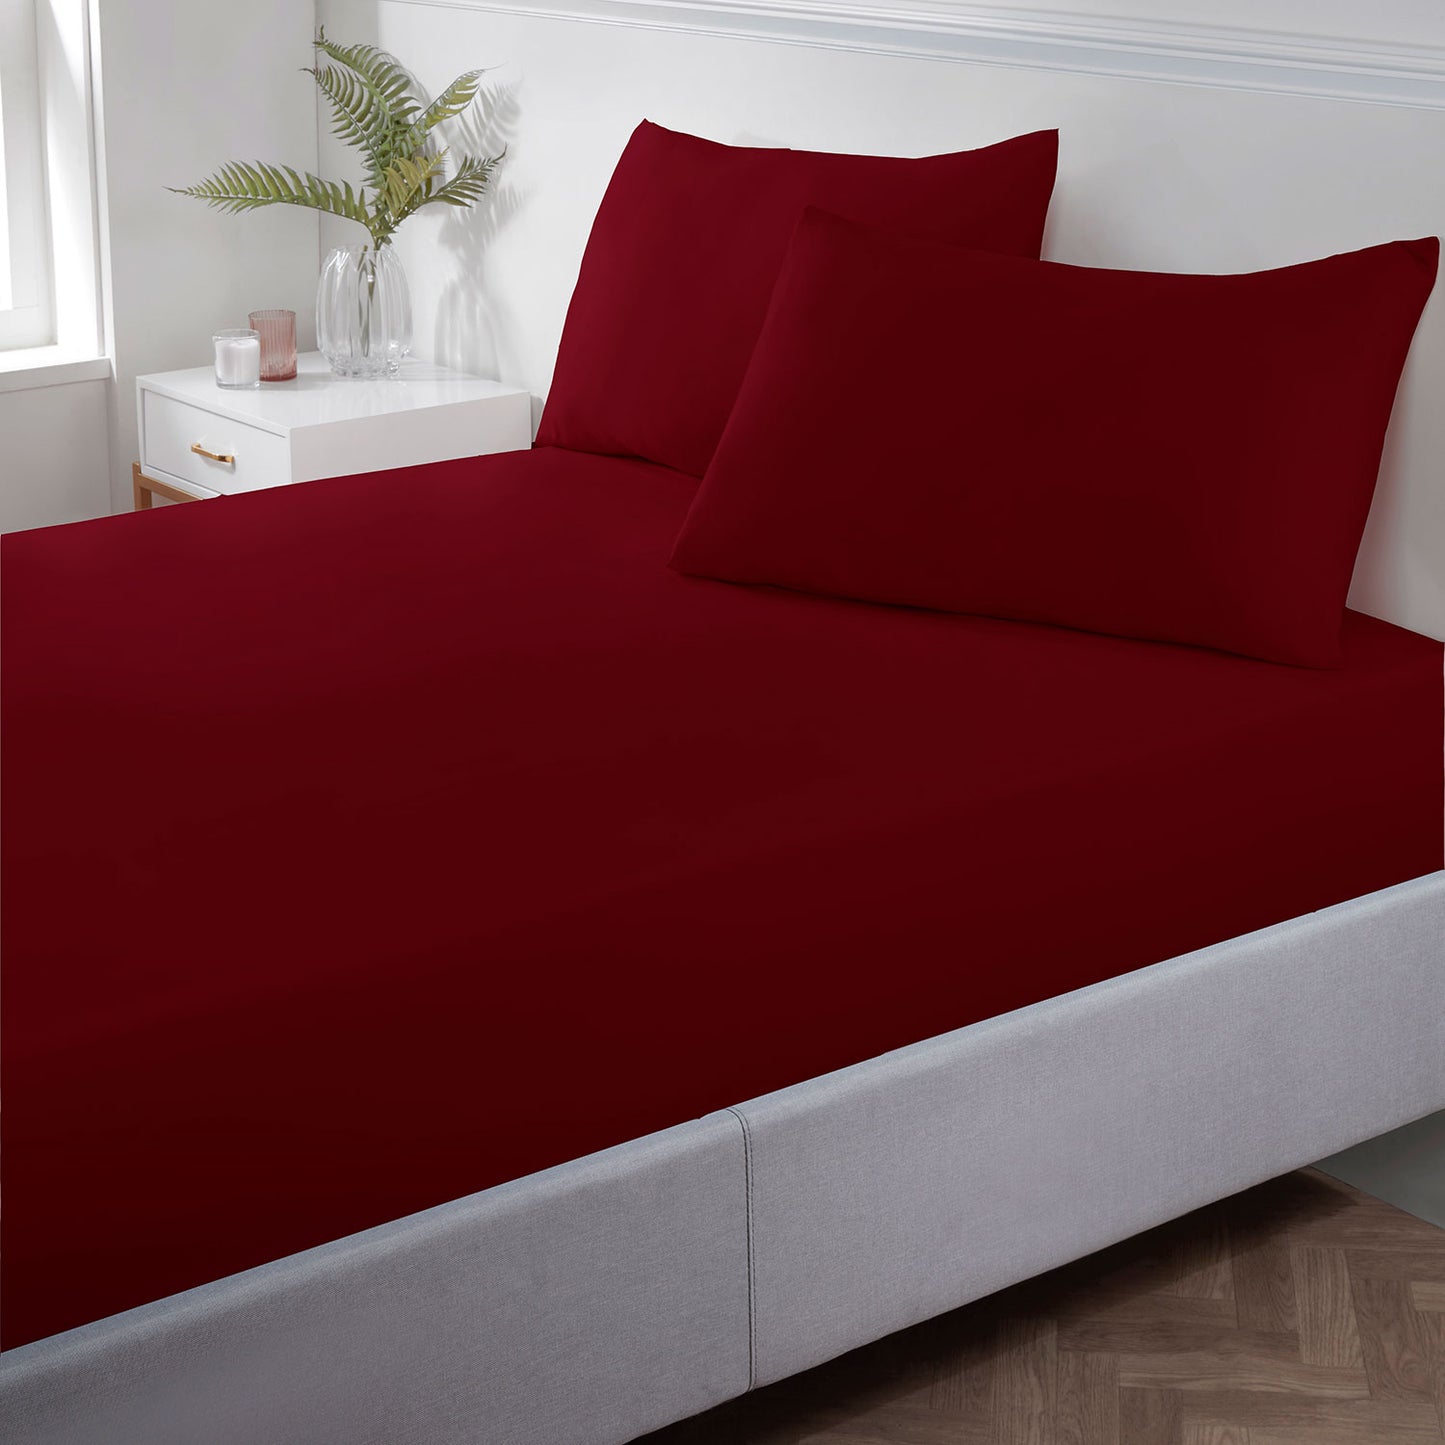 Red Super Soft Easycare Fitted Sheet